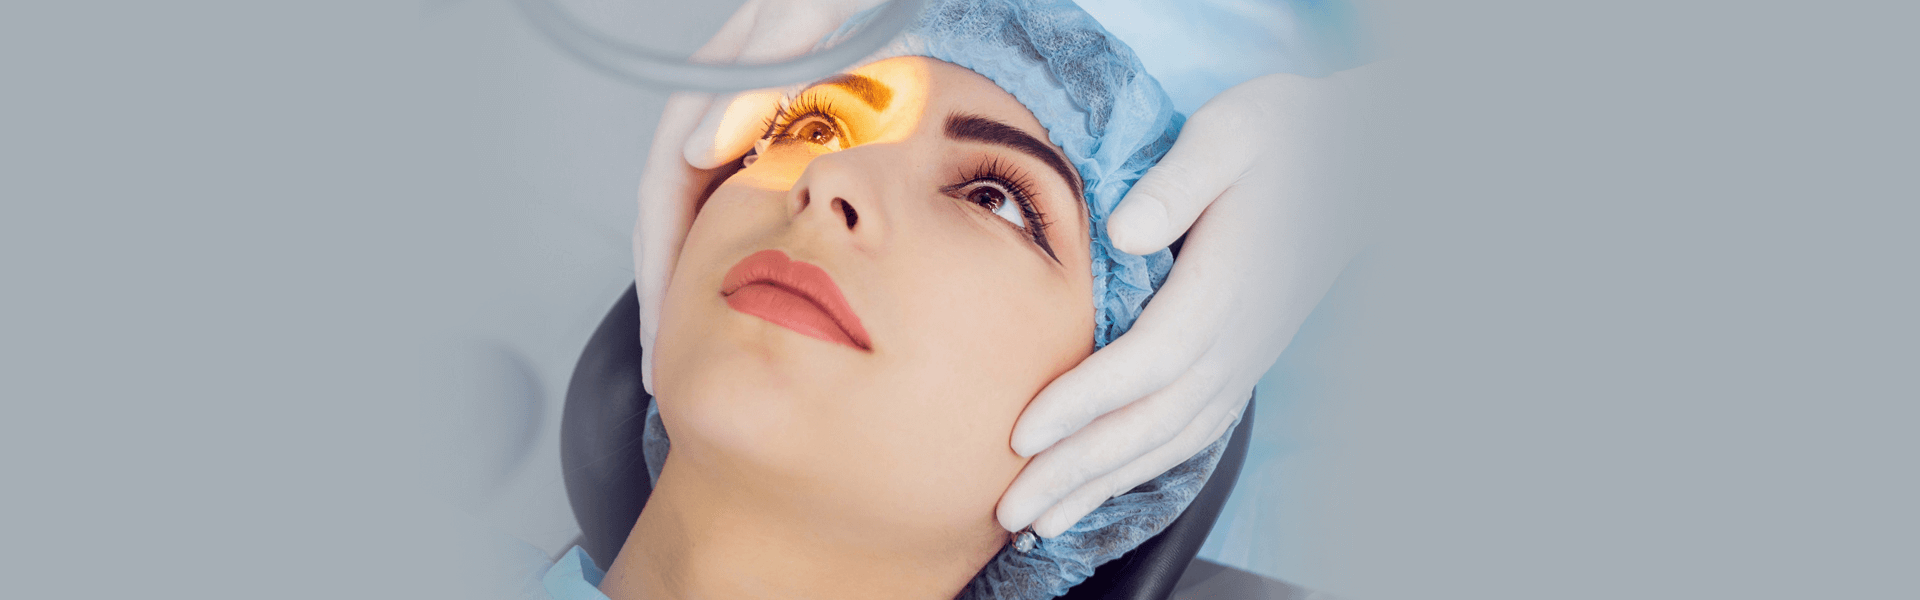 Get More Informed About LASIK Eye Surgery